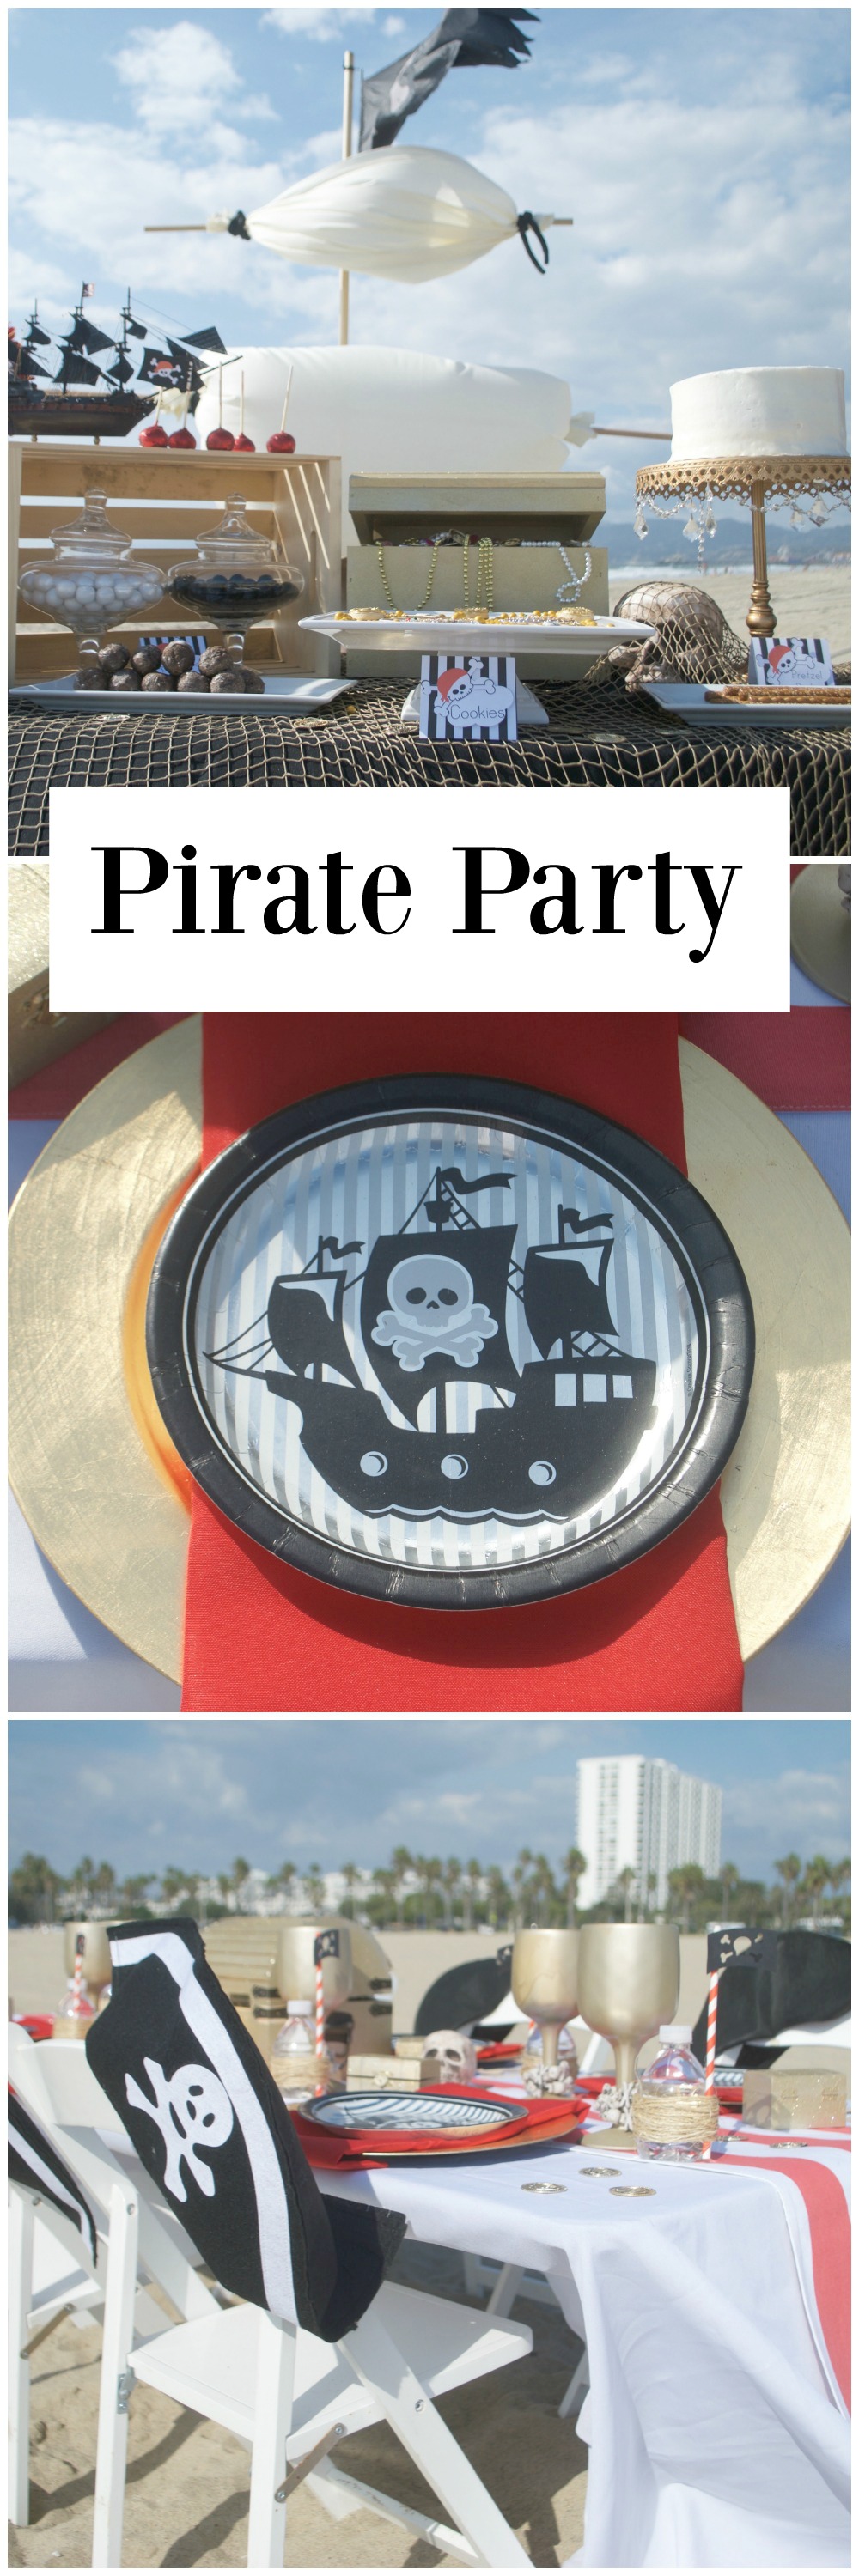 Pirate Party by Just Posh Parties | featured on PartiesforPennies.com